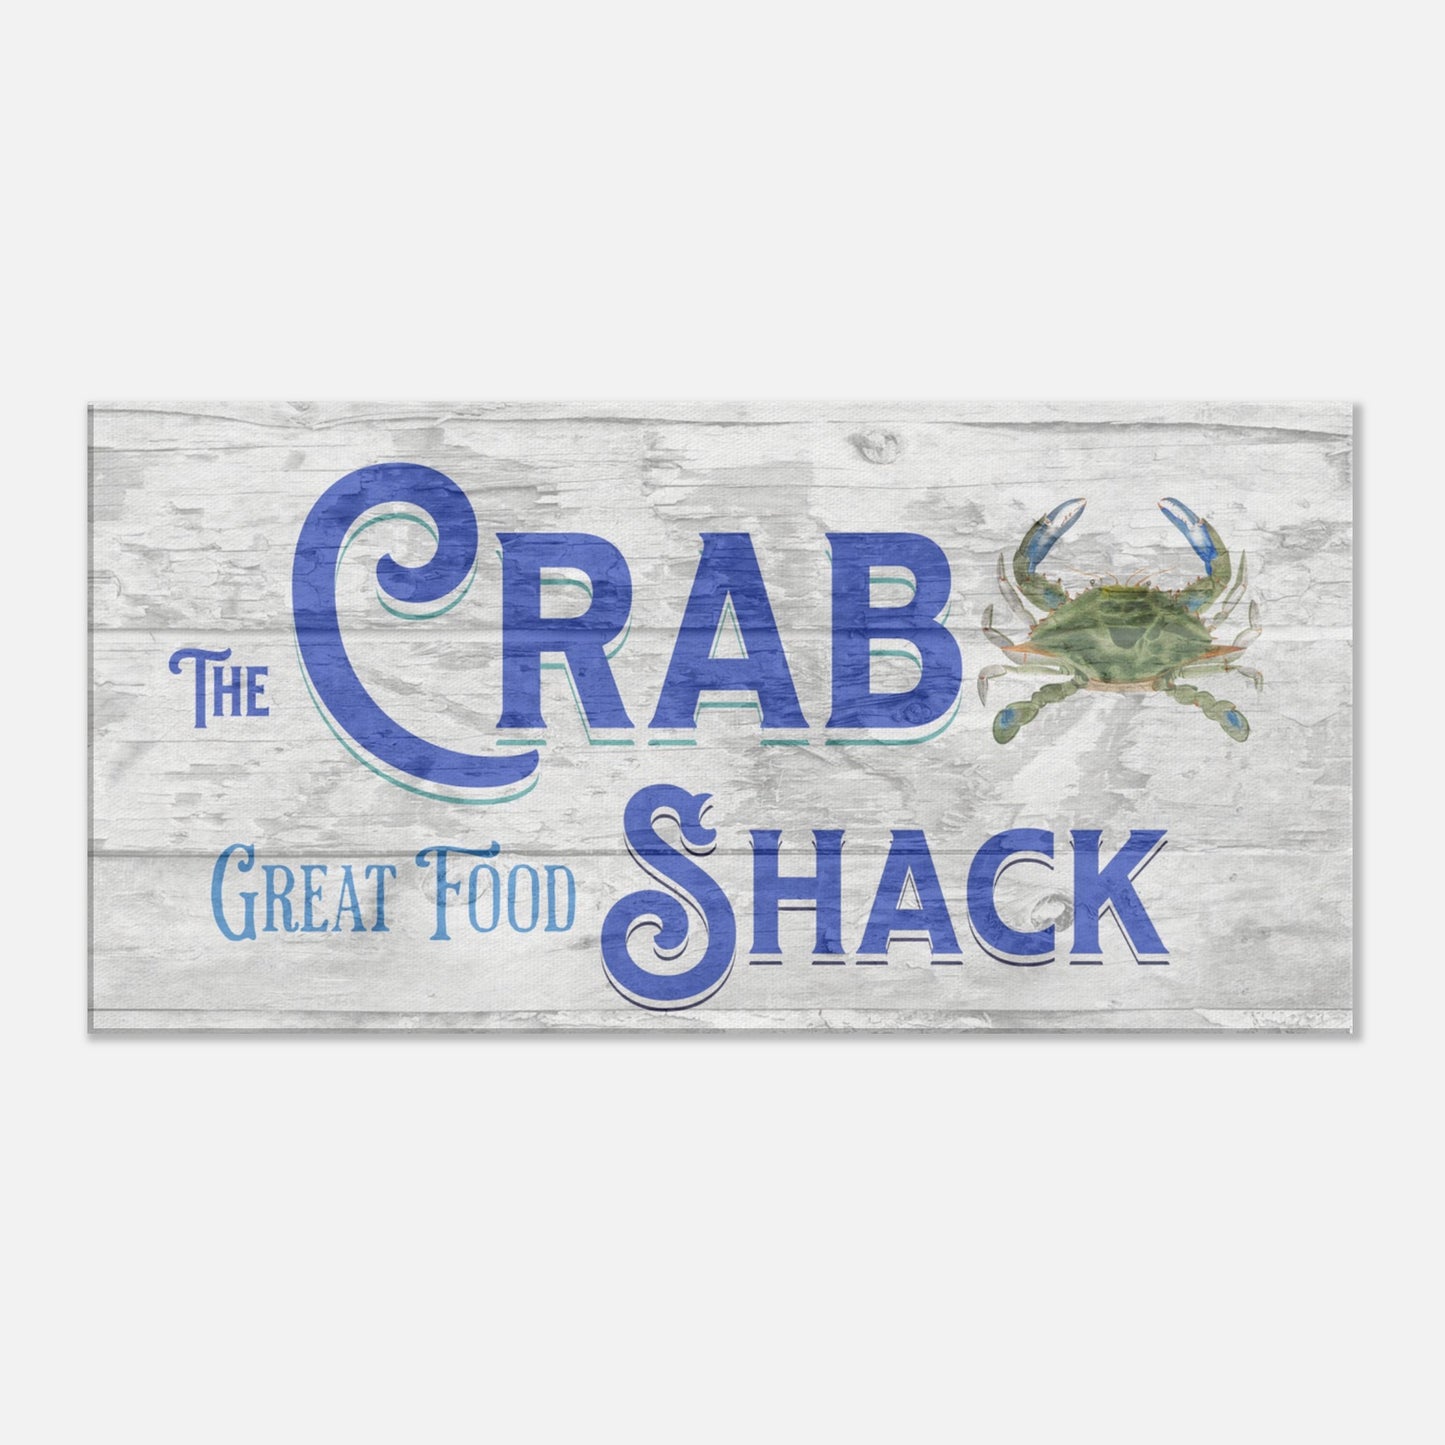 The Crab Shack Canvas Wall Print by Caribbean Rays